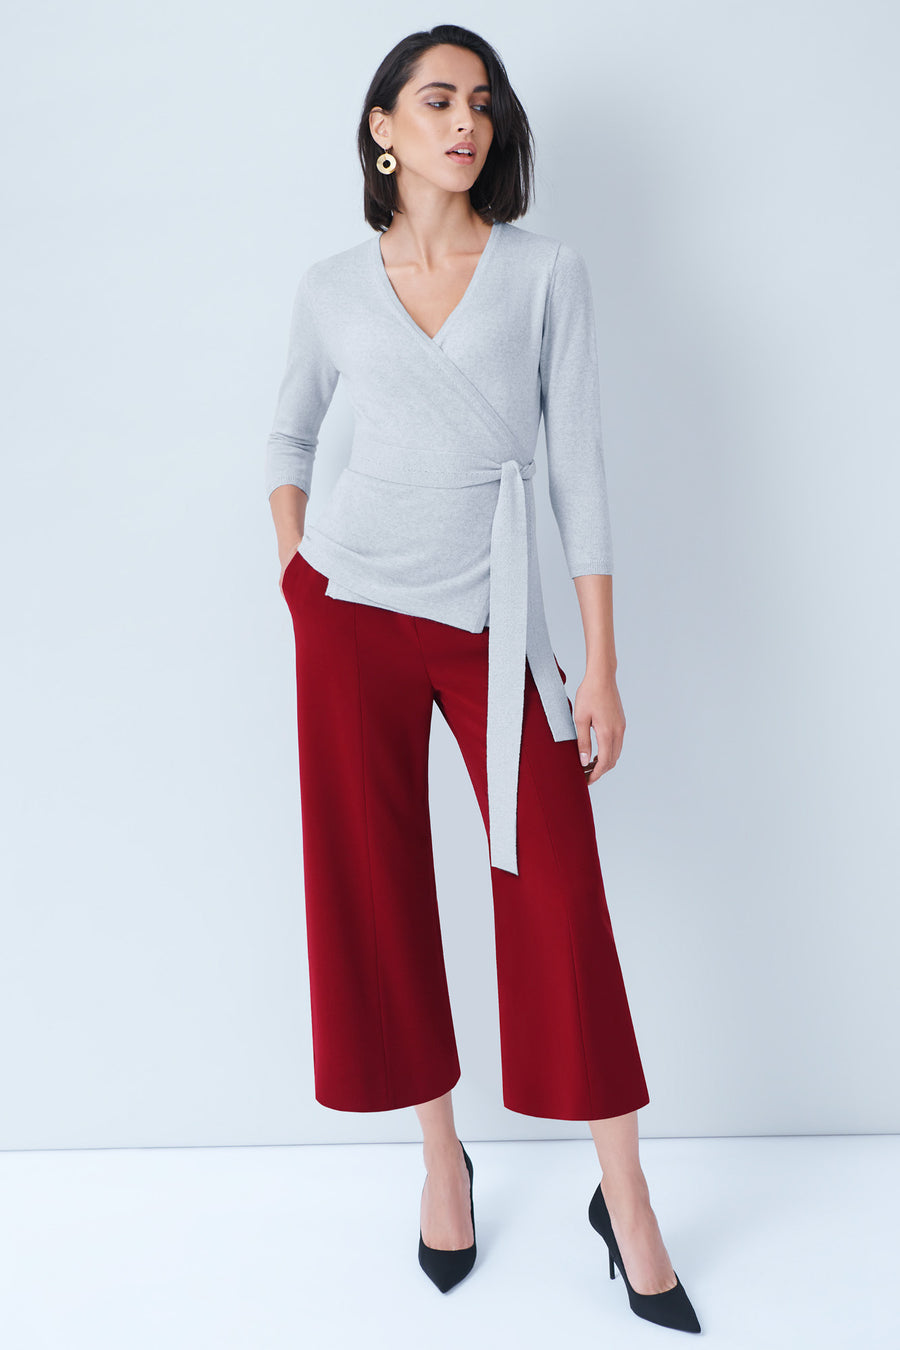 Kendle Red Culottes